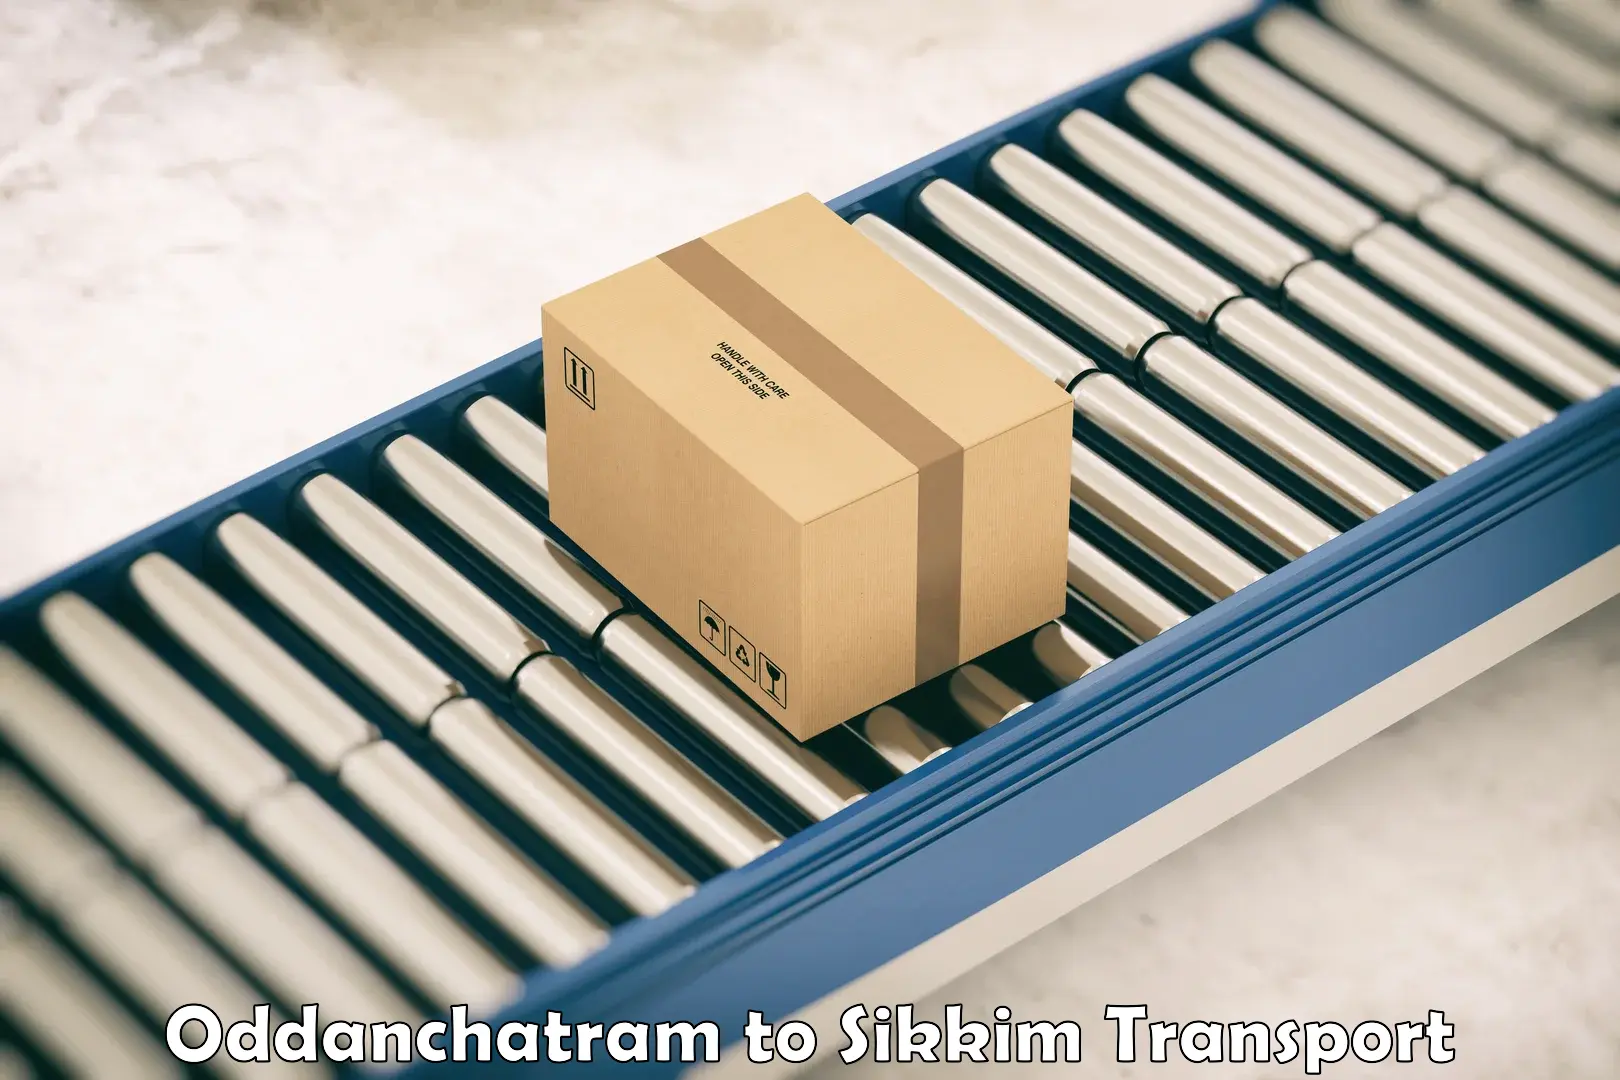 Package delivery services Oddanchatram to Sikkim